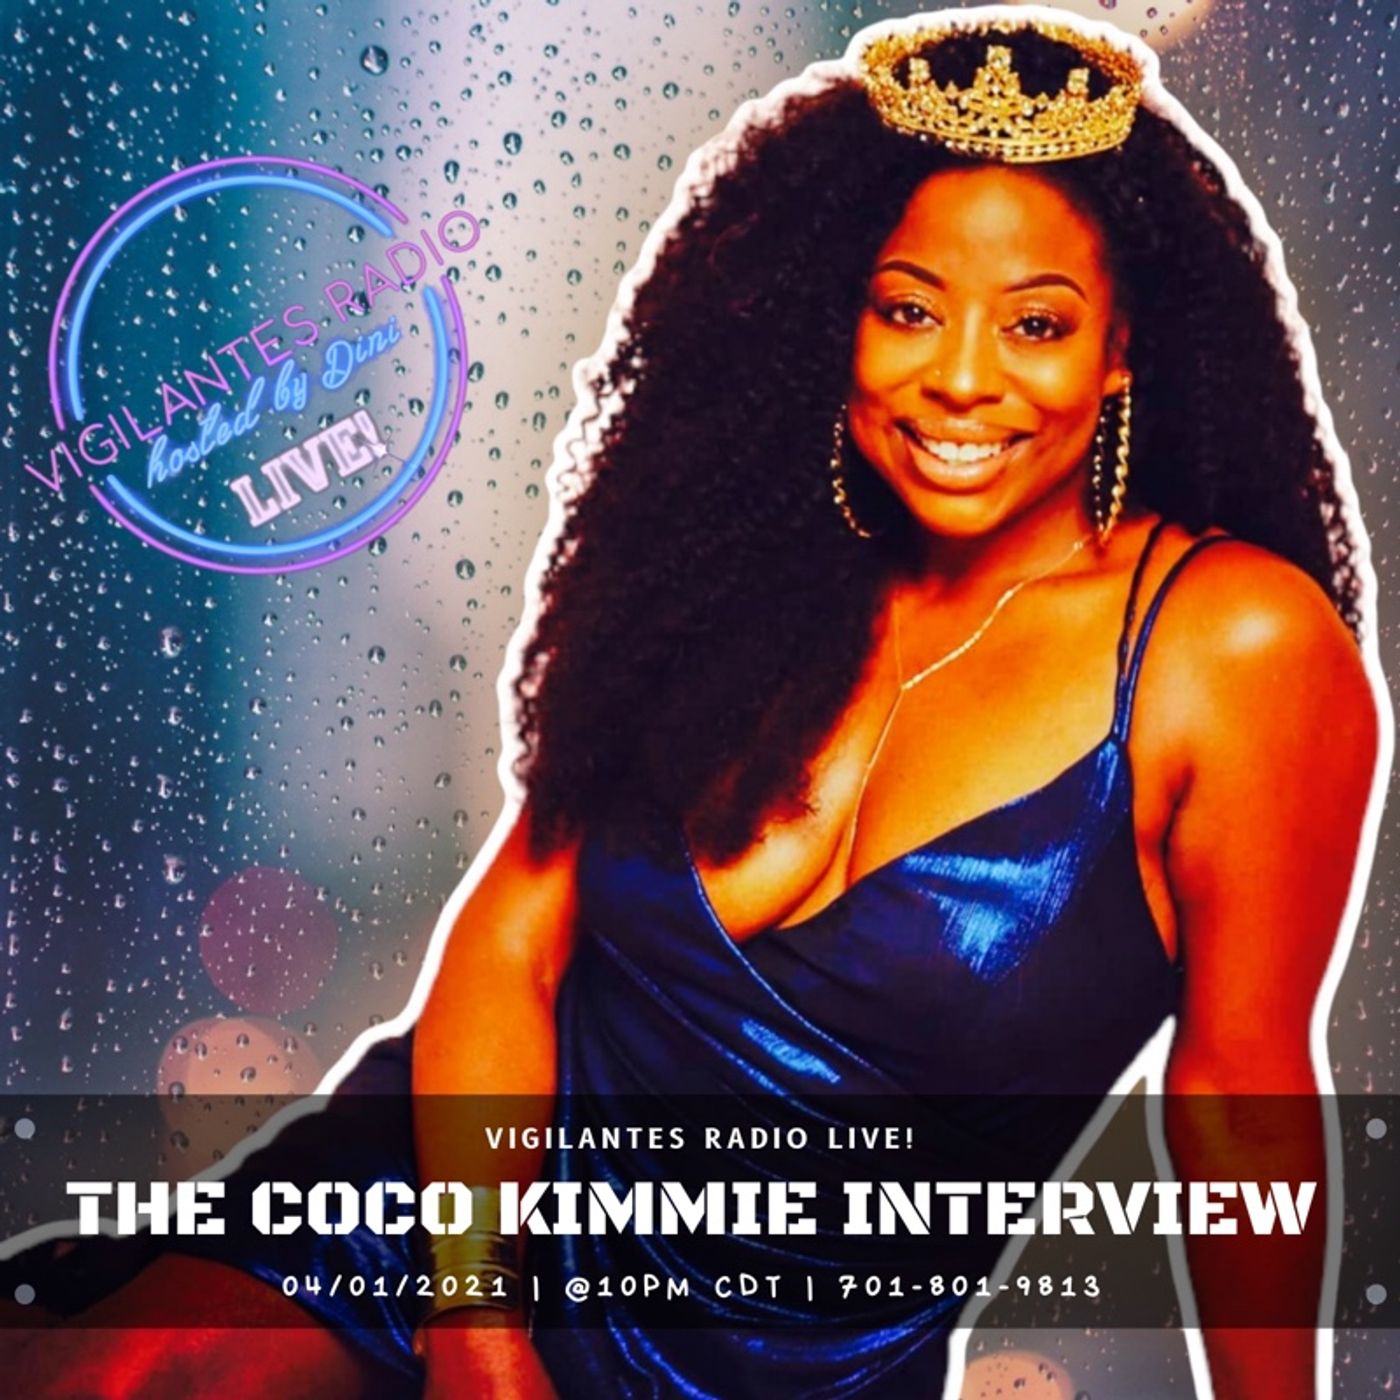 The Coco Kimmie Interview. Image